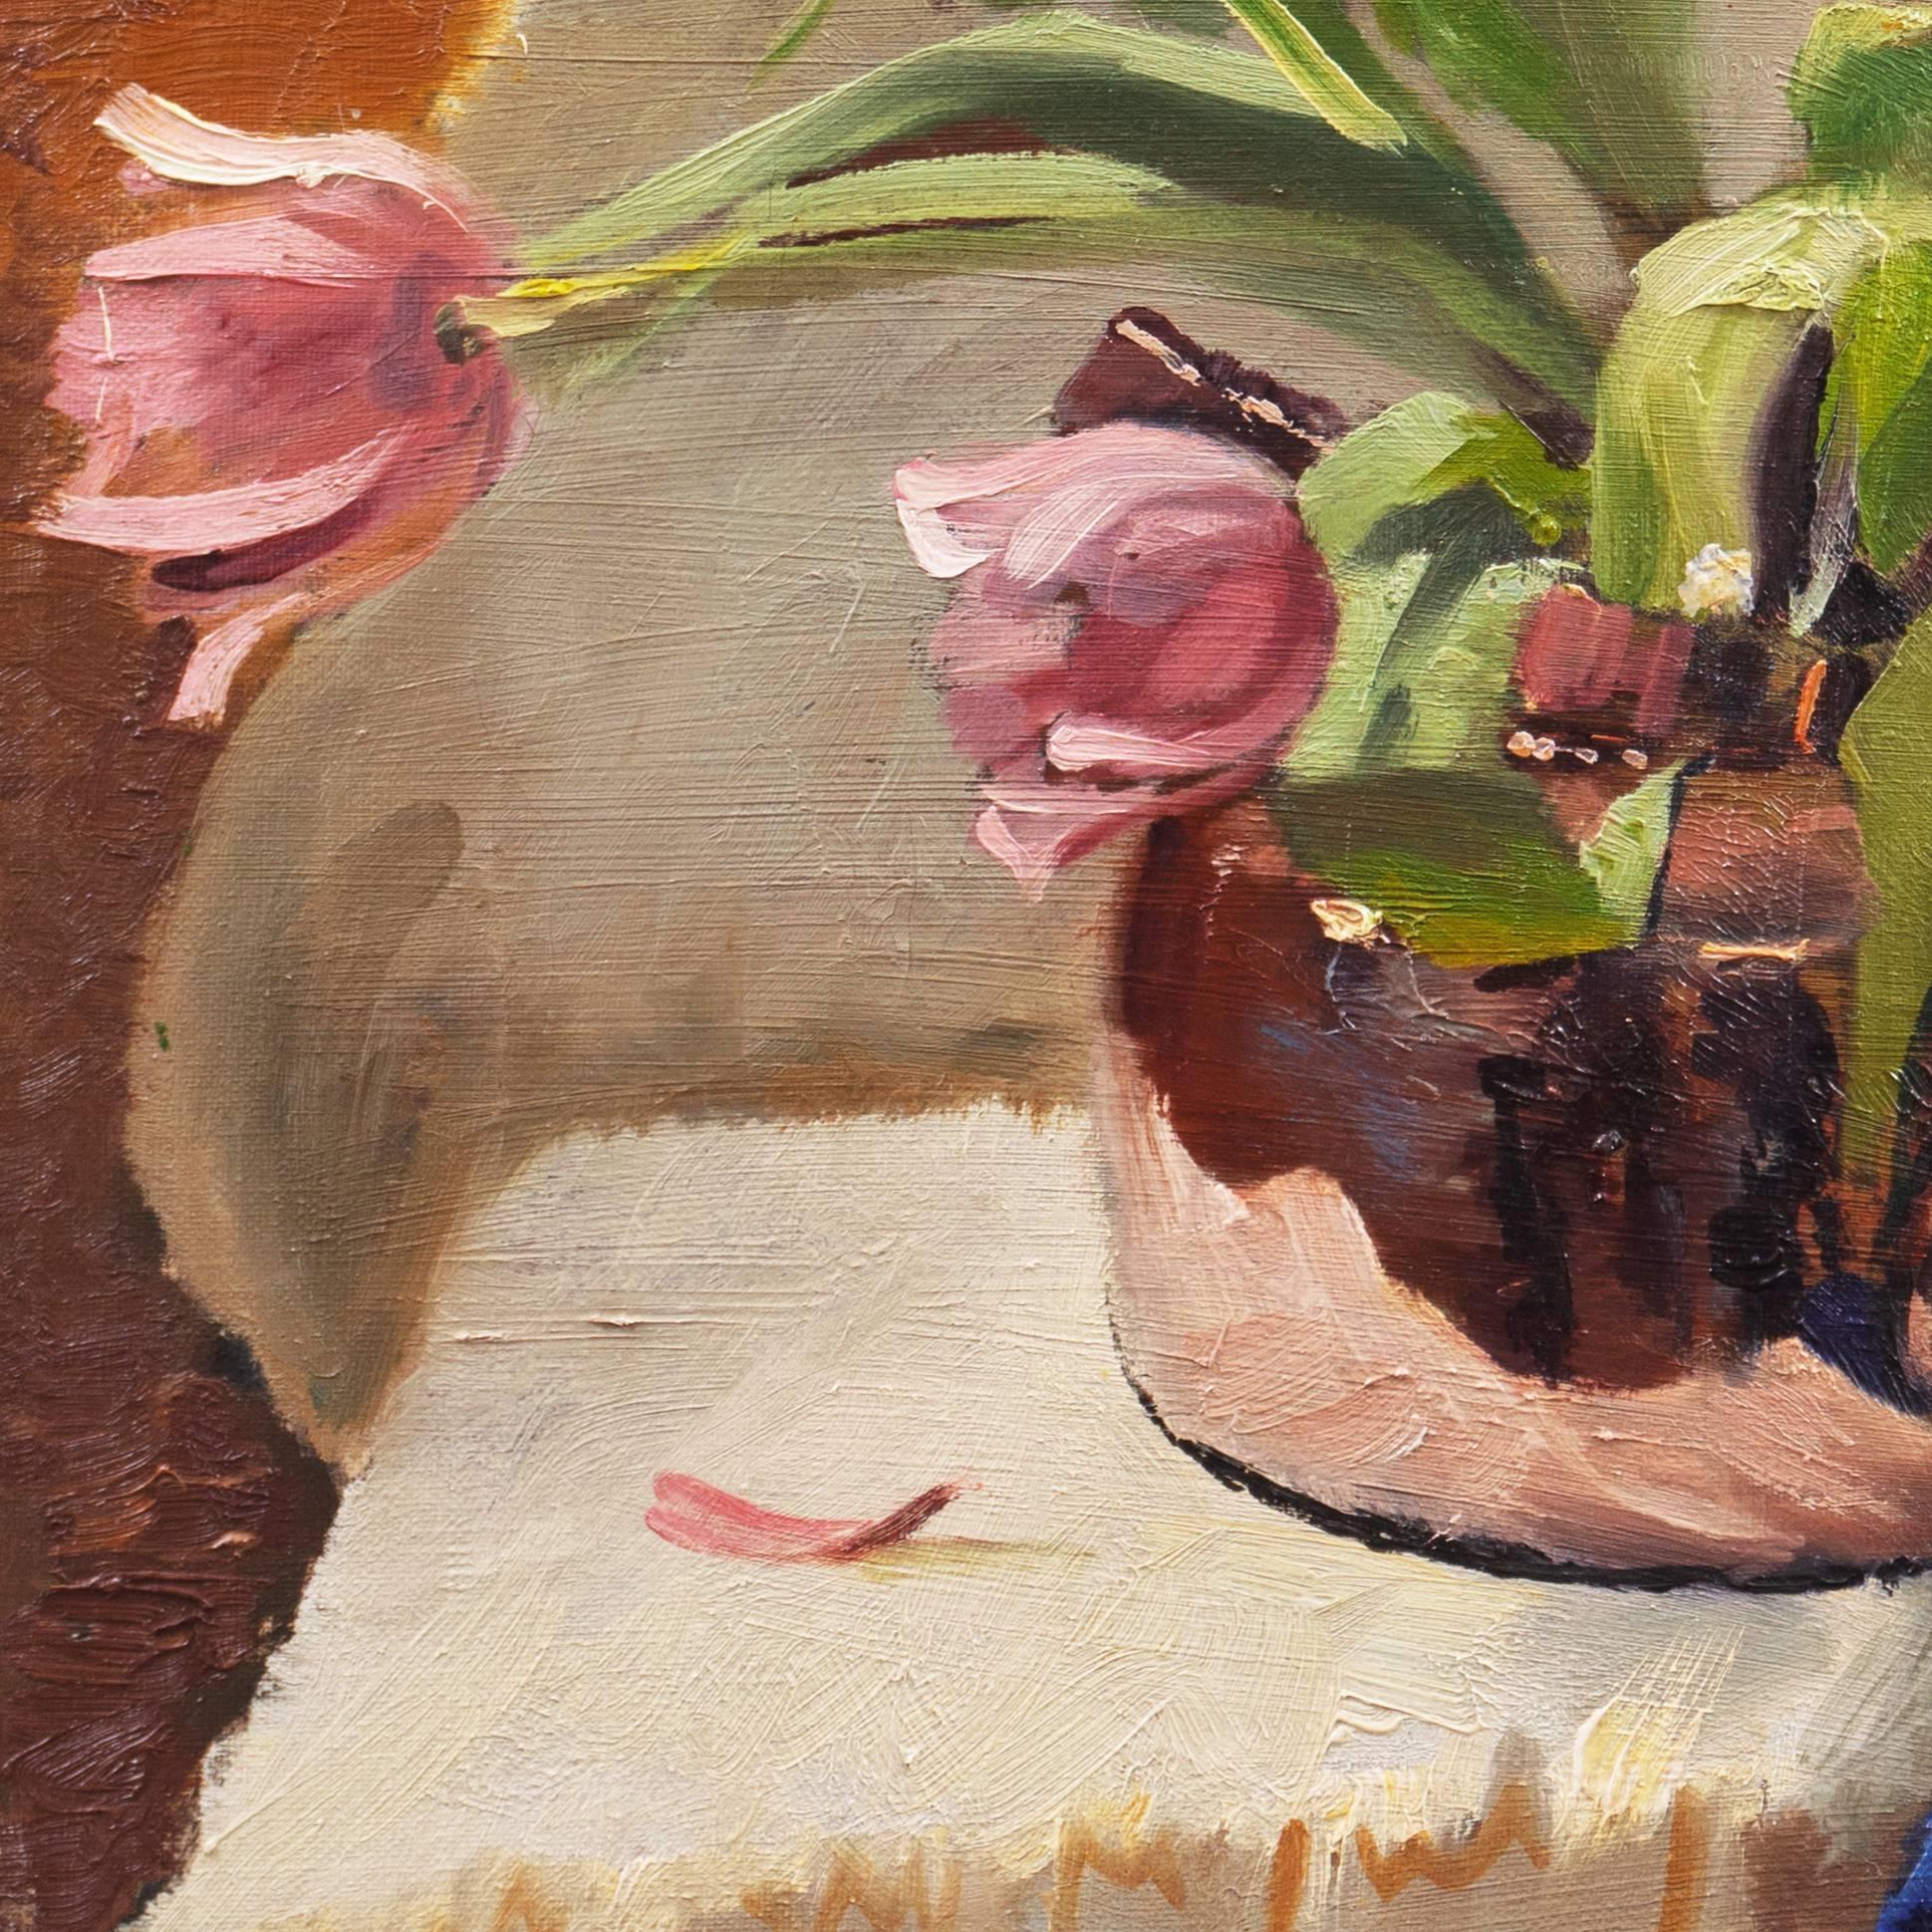 Signed lower left 'G. Bundgaard' for Gunnar Bundgaard (Danish, 1920-2005) and painted circa 1950.

An elegant and painterly still-life showing pink tulips gracefully arranged in an antique copper kettle and contrasted against a draped background of